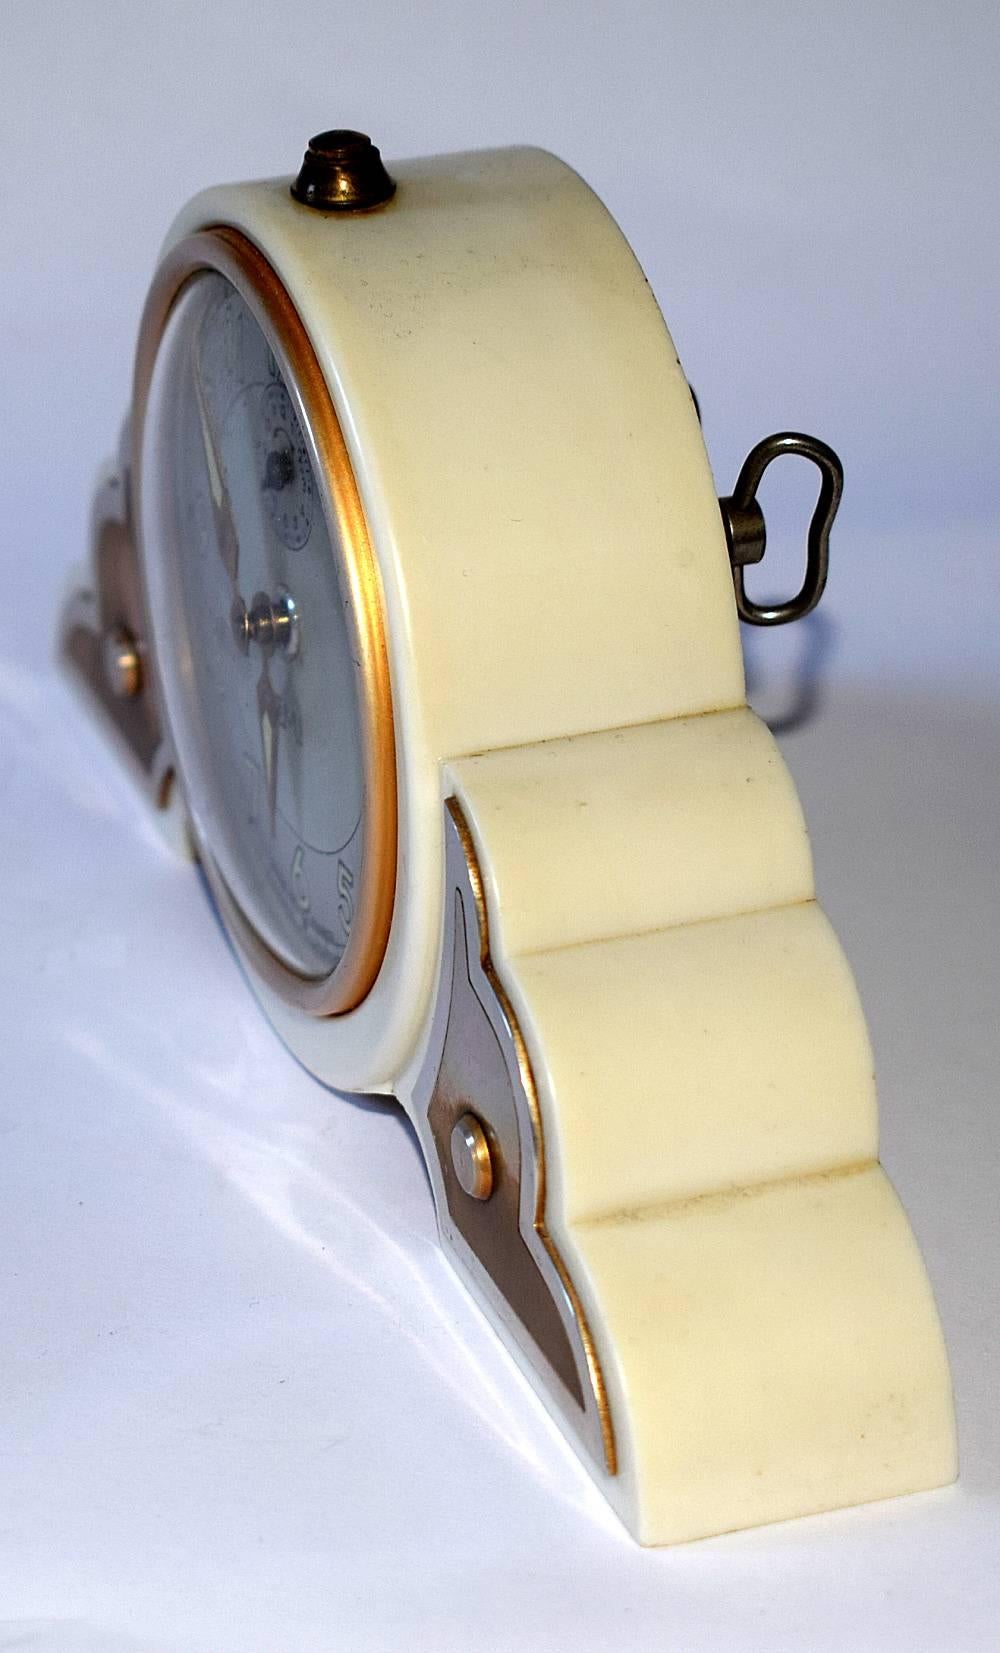 Very attractive 1930s Art Deco Ivory colored bakelite clock. Originating from France this wonderful clock is the epitome of Art Deco with its fabulous cloud shaped case. The clock works well and keeps good time. We haven’t tested the alarm aspect to